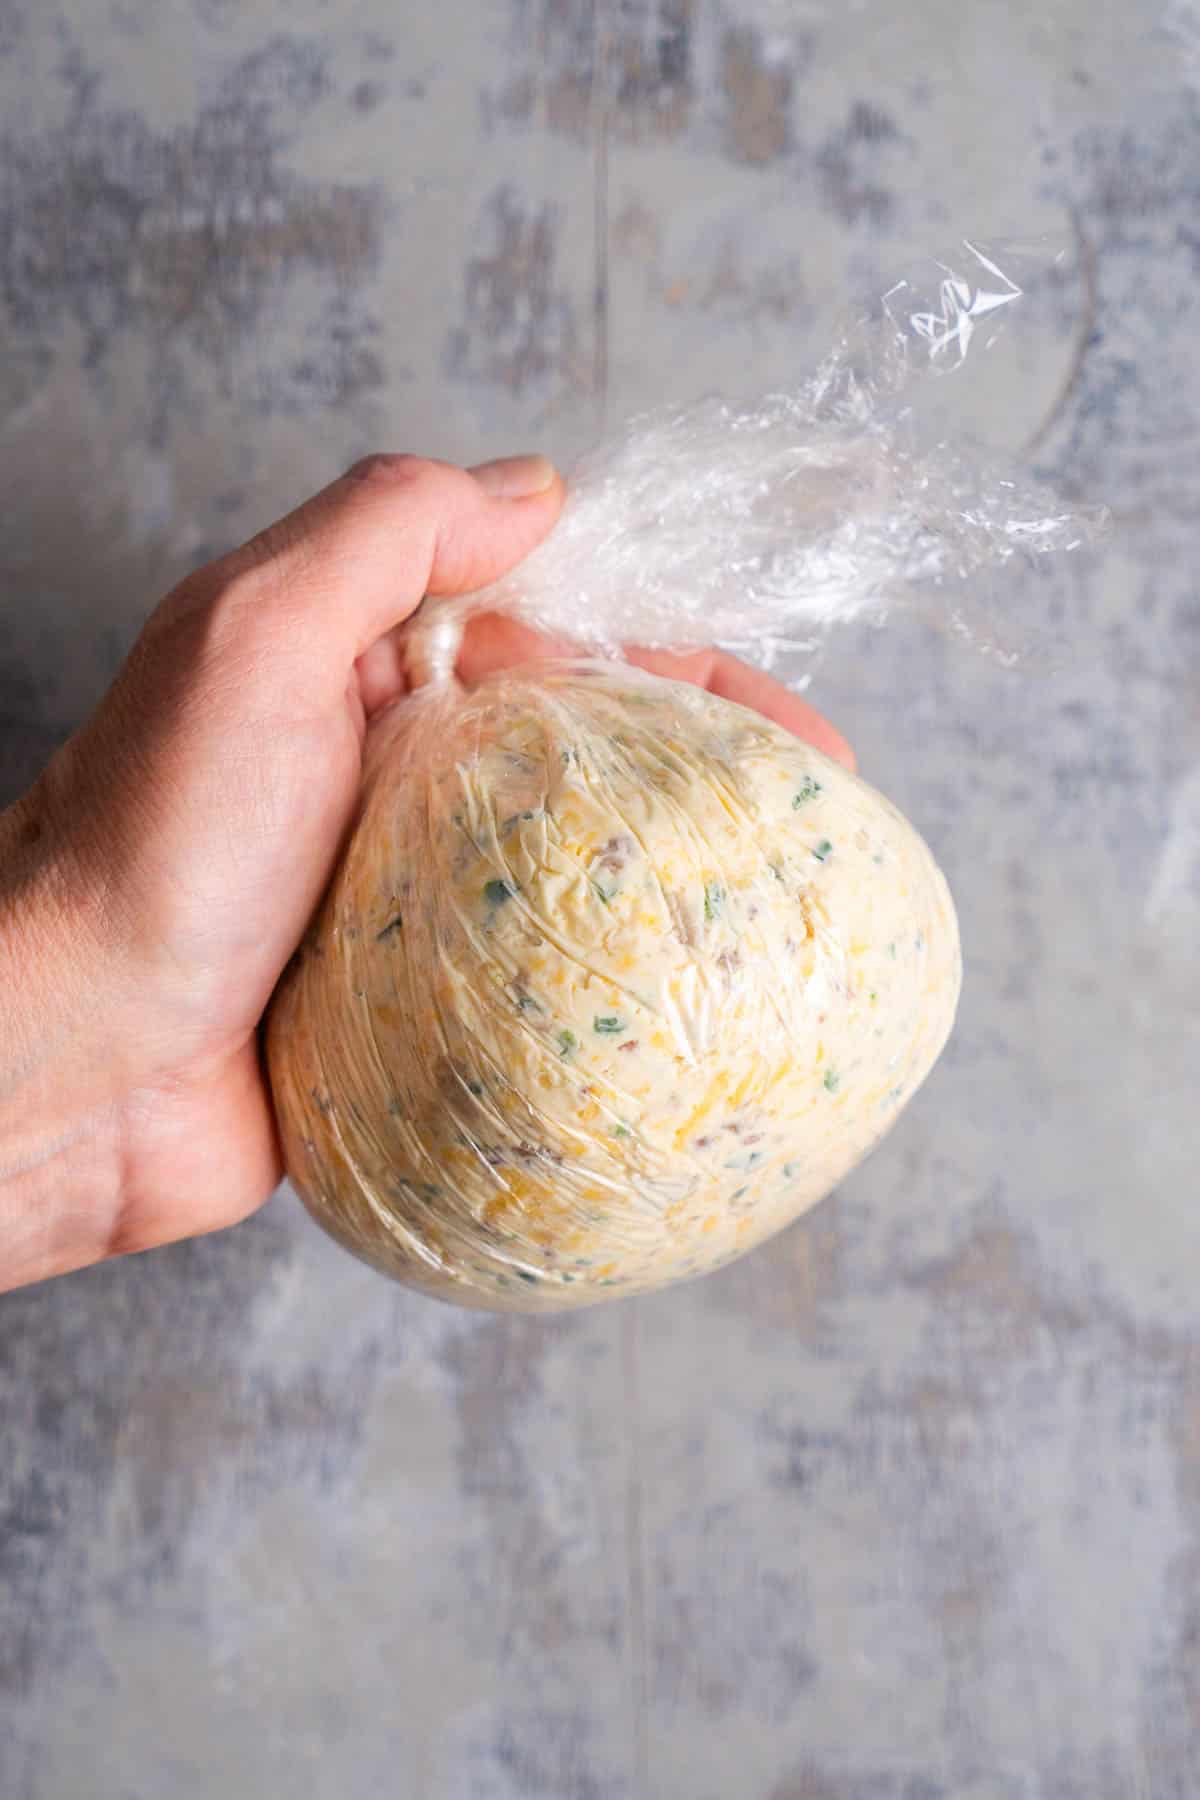 person's hand holds cheese ball in plastic wrap